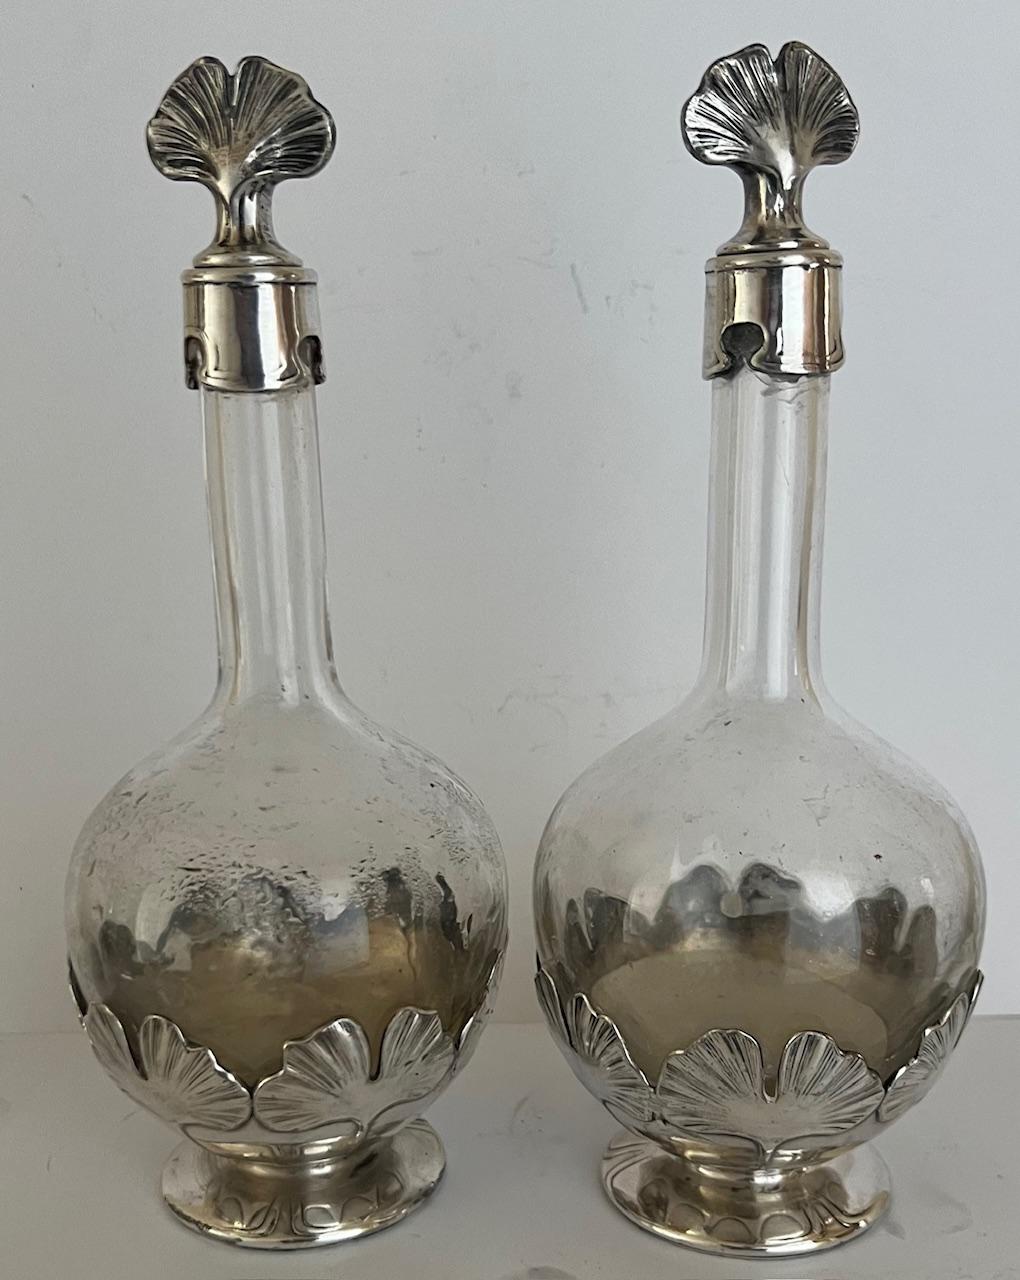 Early 20th Century Christofle Art Nouveau Decanter and Glass Set of 8 For Sale 1